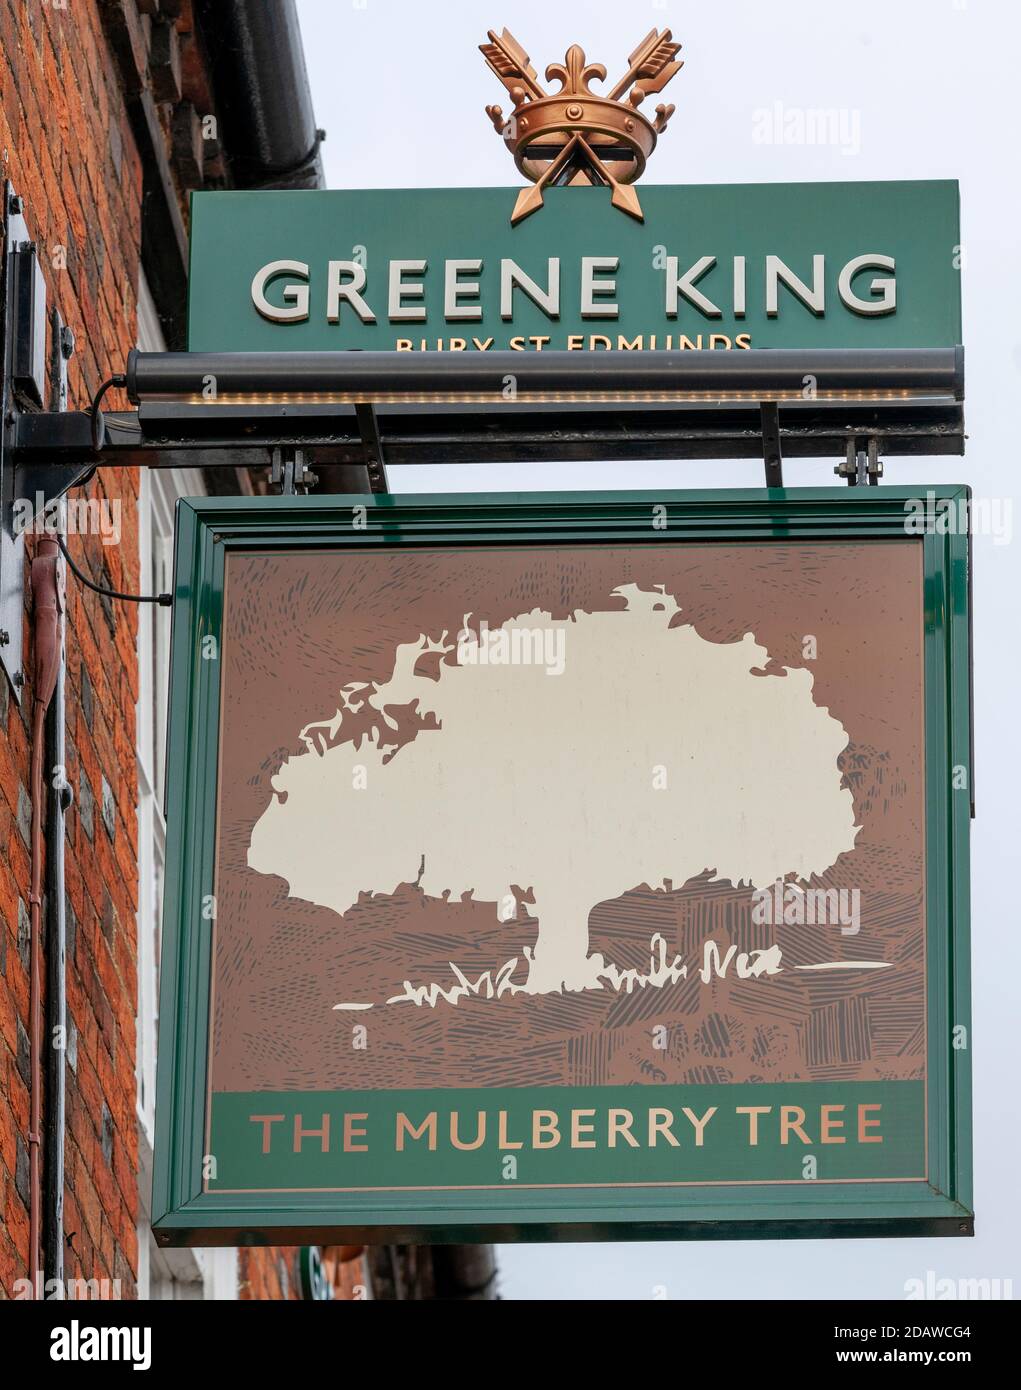 Traditional hanging pub sign for The Mulberry Tree Public House, High Street, Stevenage, Hertfordshire, England, UK - a Greene King Pub Stock Photo